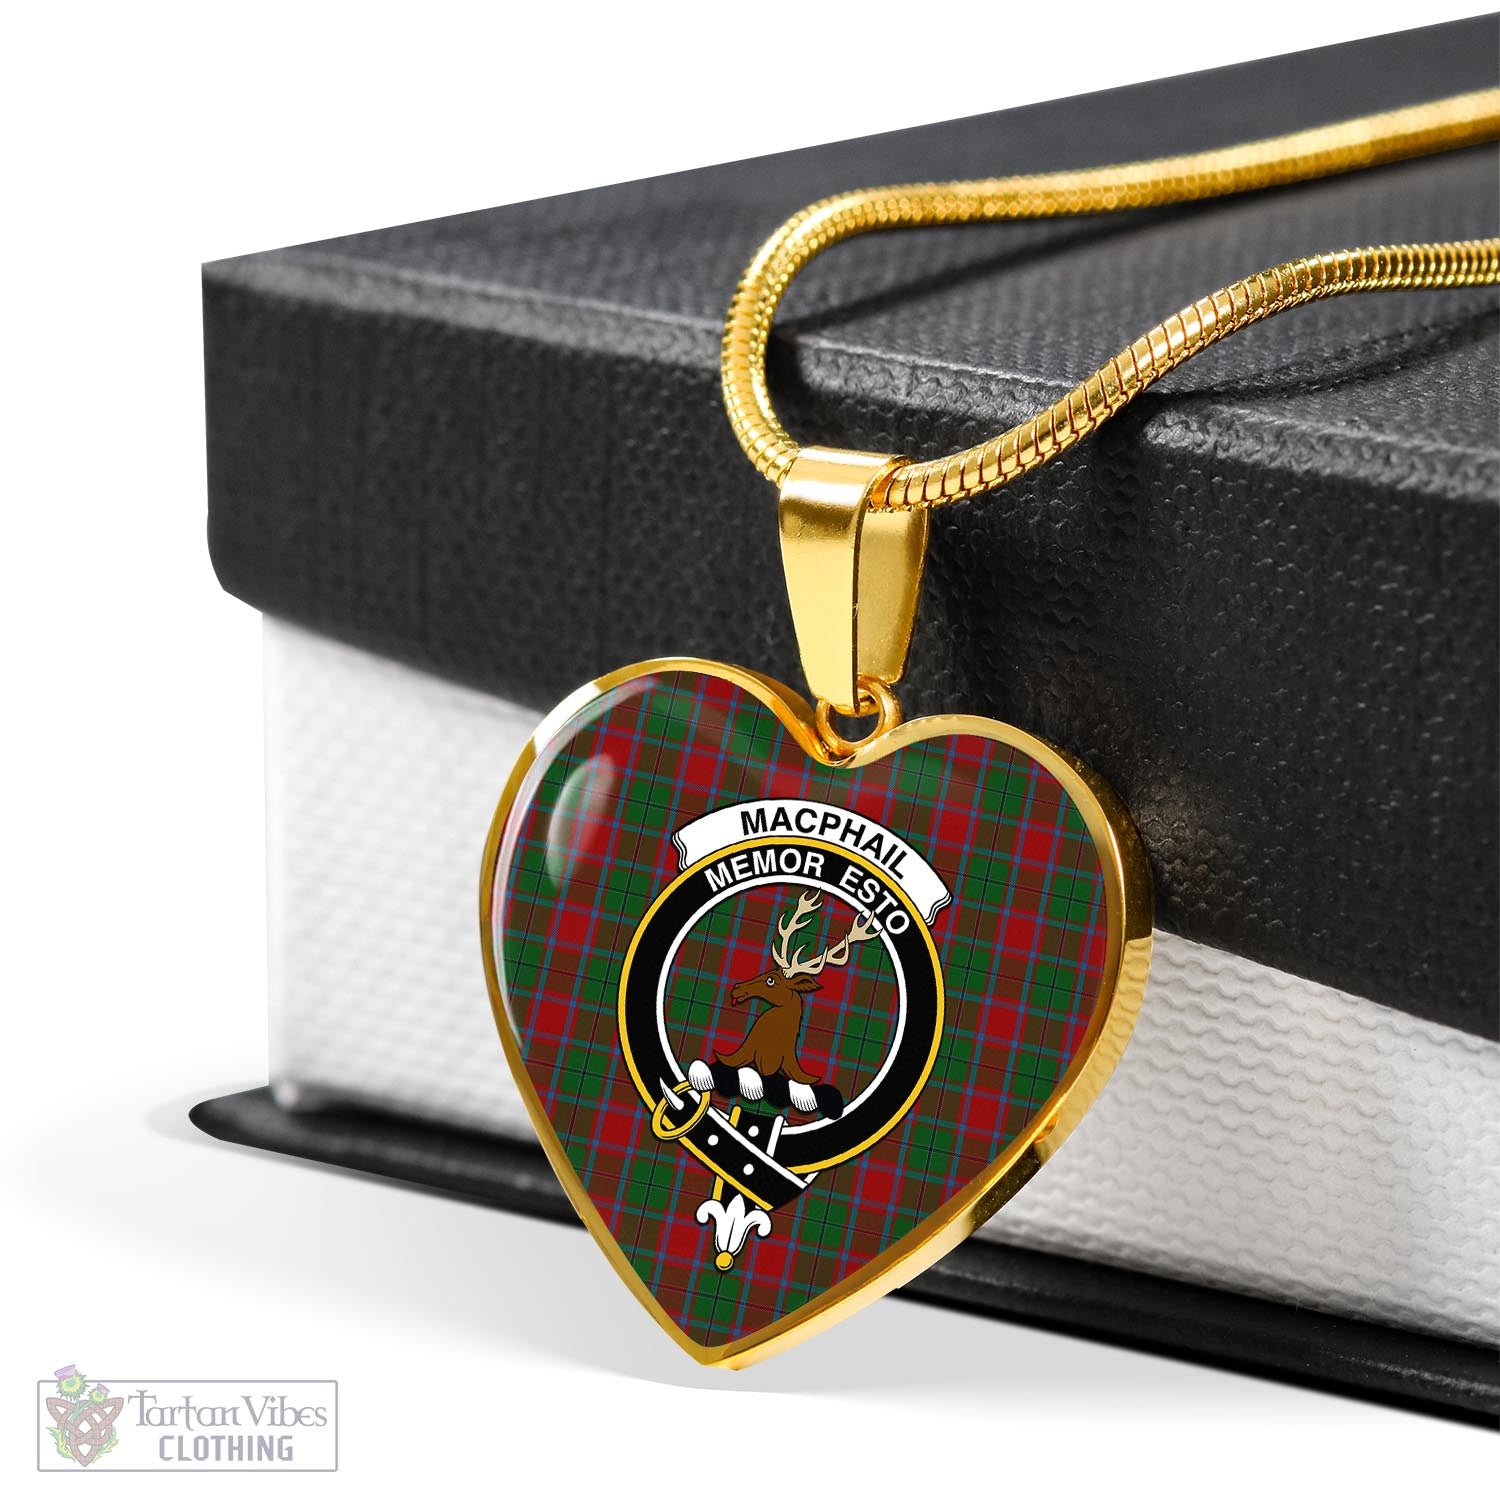 Tartan Vibes Clothing MacPhail Blue Bands Tartan Heart Necklace with Family Crest